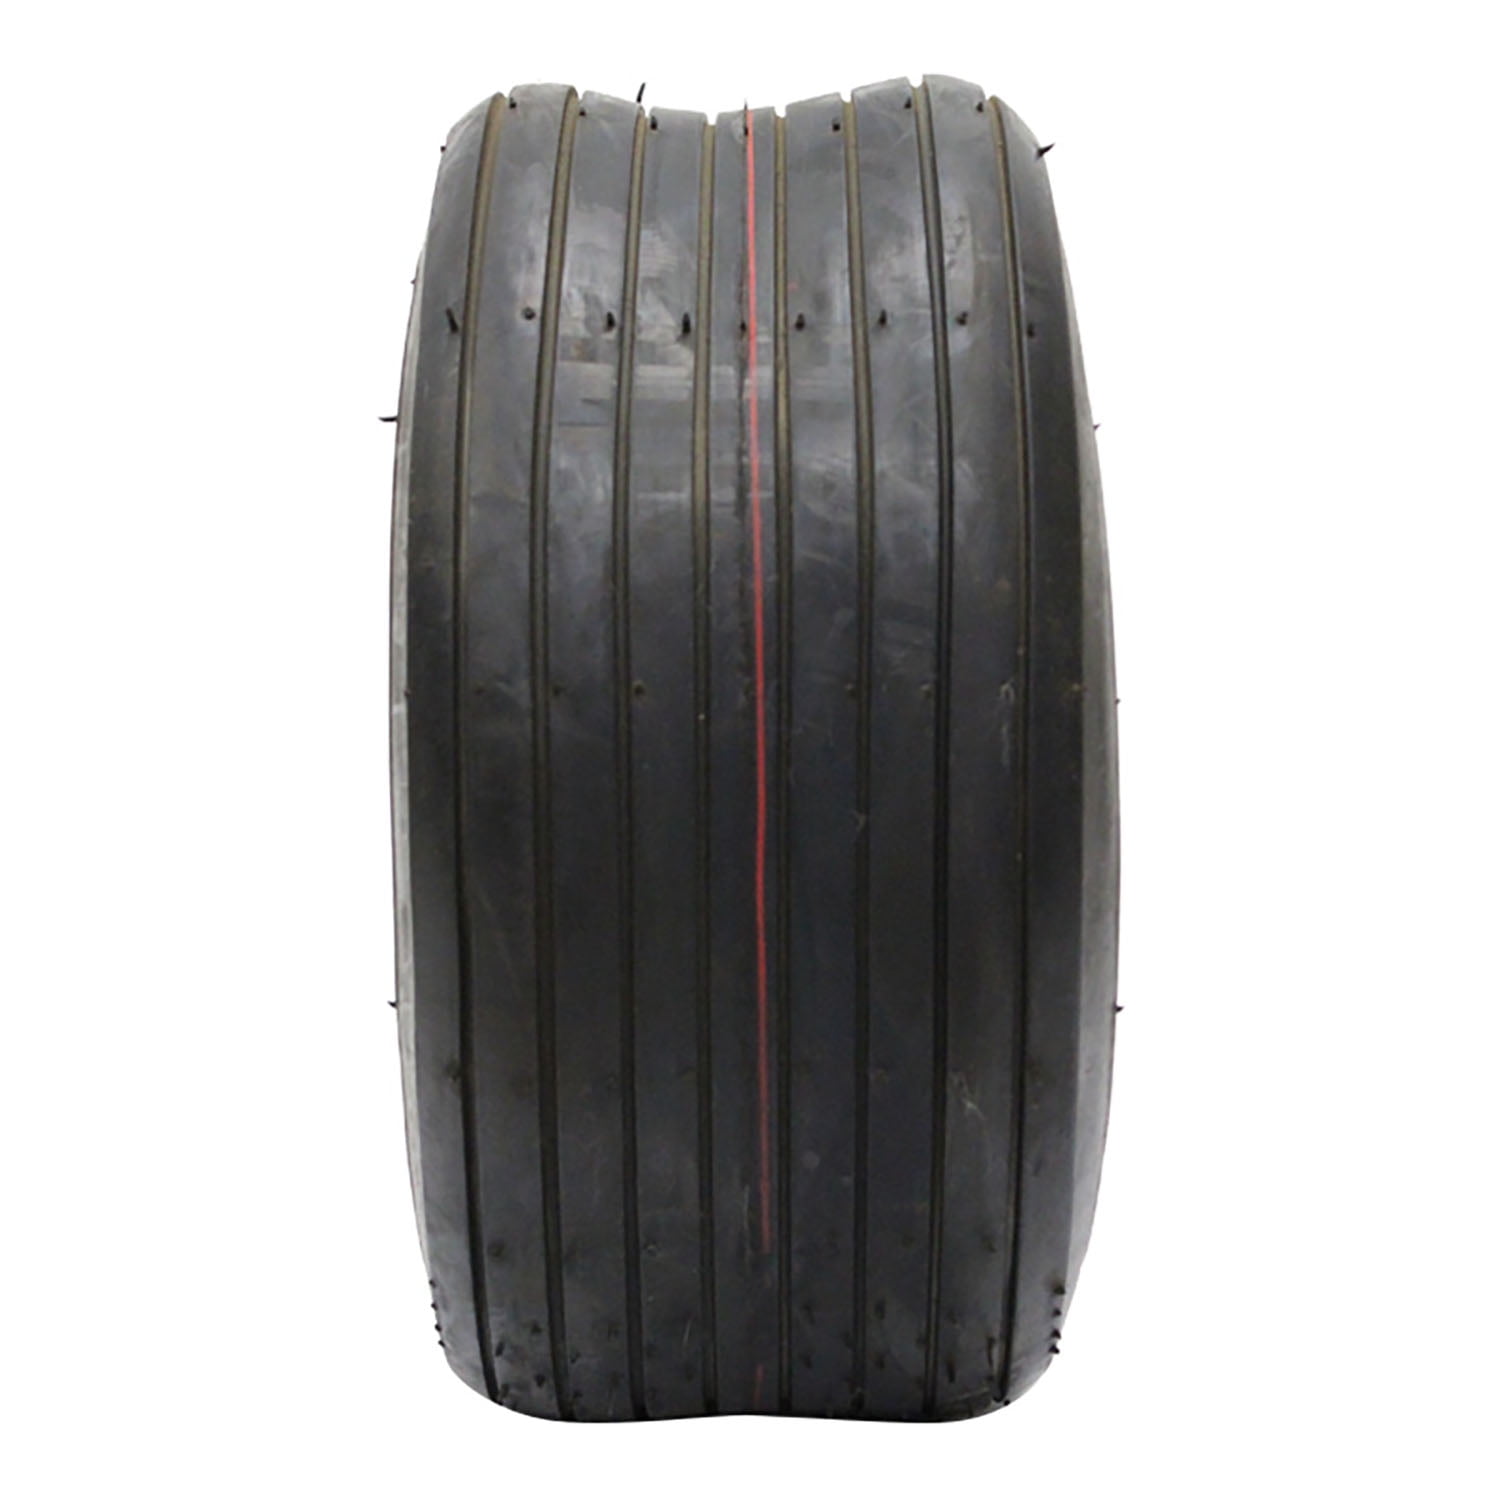 Details about   B1TI28 Straight Rib Tire for Carlisle Smooth Operators 13 x 6.5 x 6 